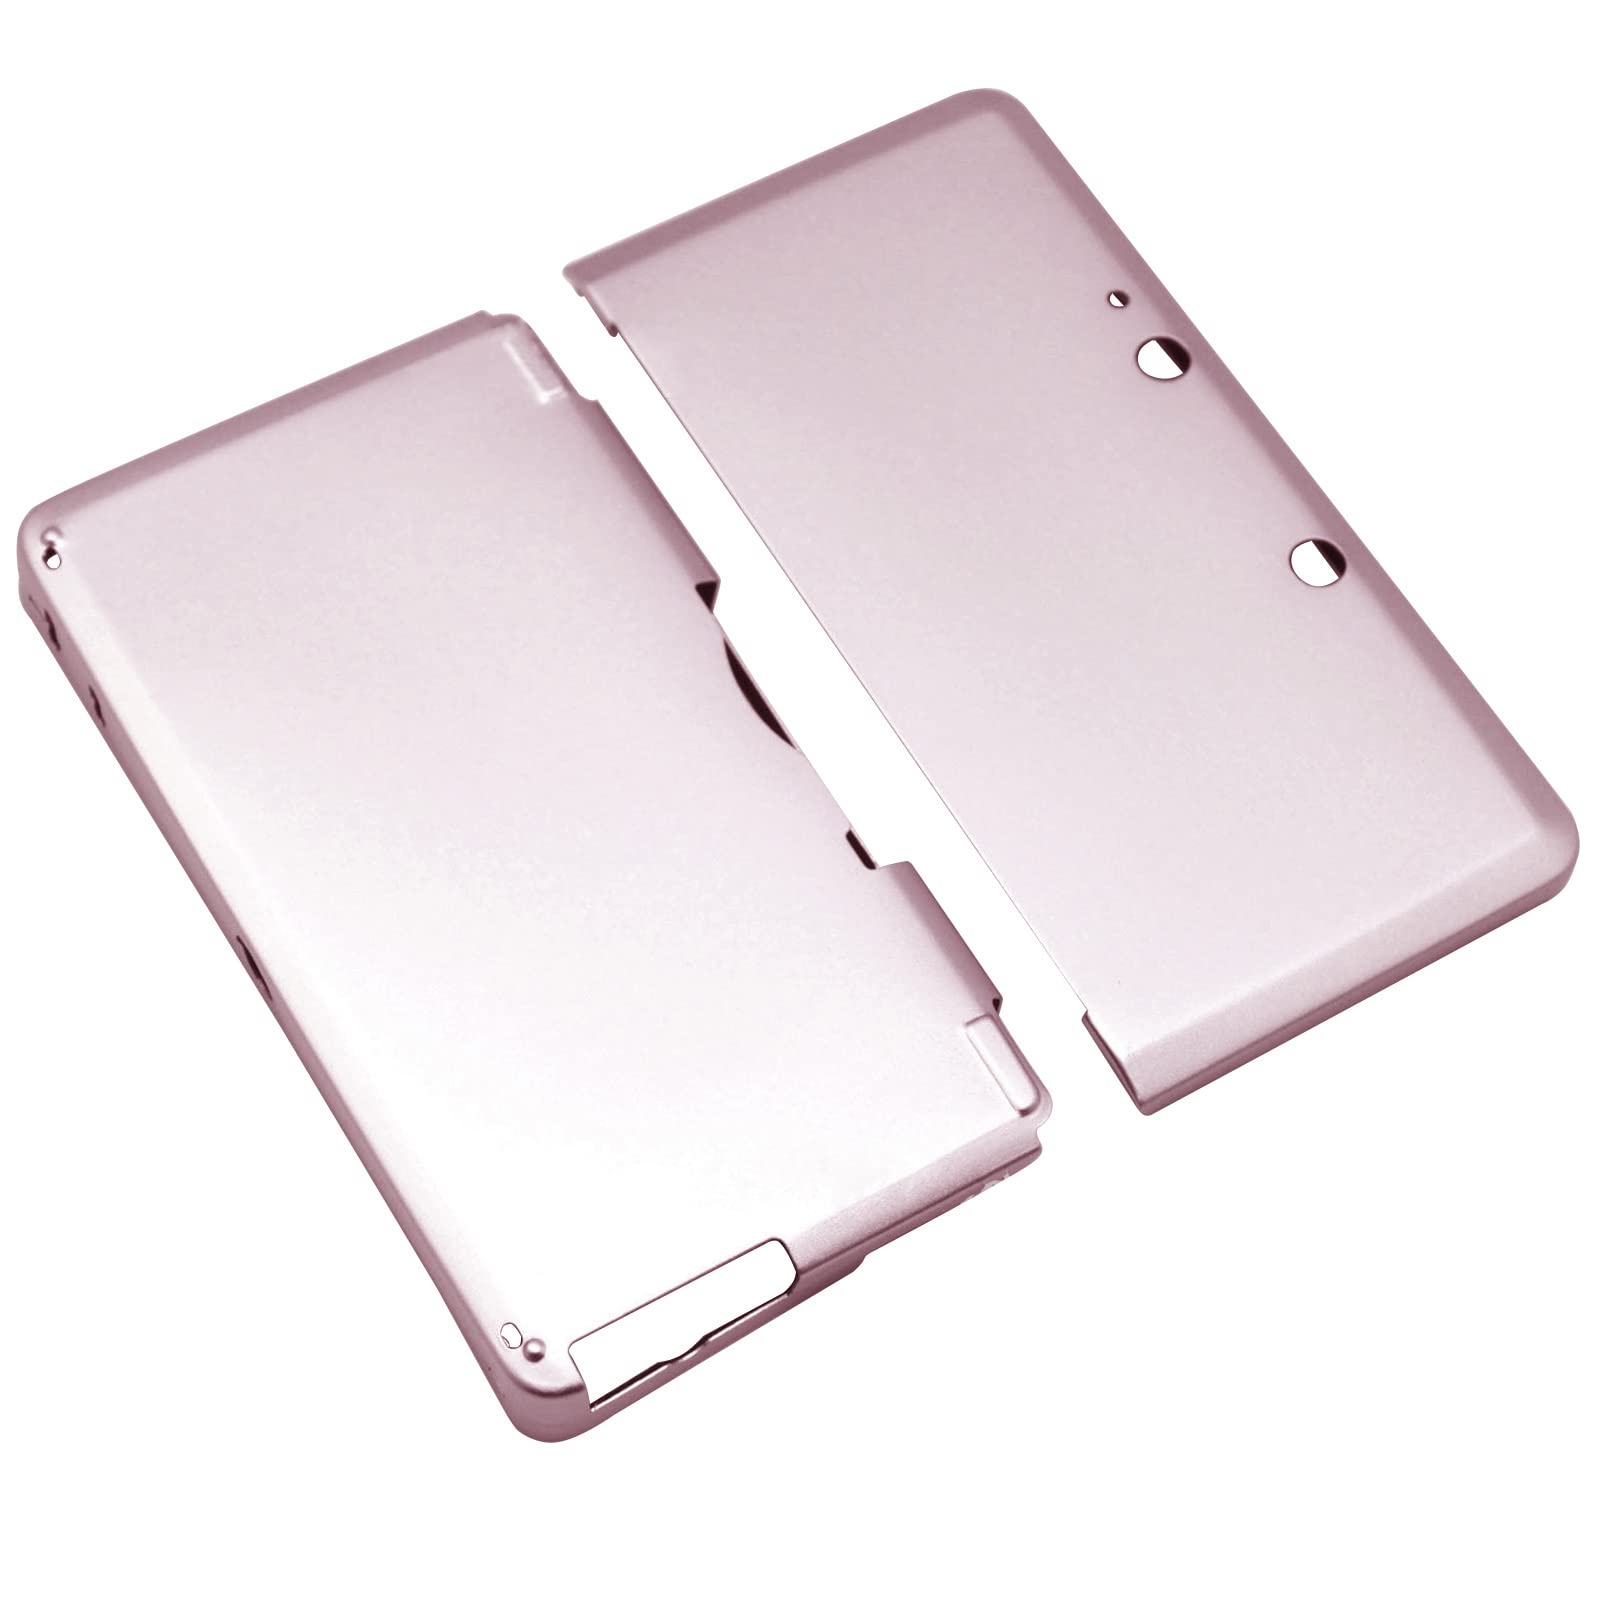 OSTENT Anti-shock Hard Aluminum Metal Box Cover Case Shell Compatible for Nintendo 3DS Console Color Pink